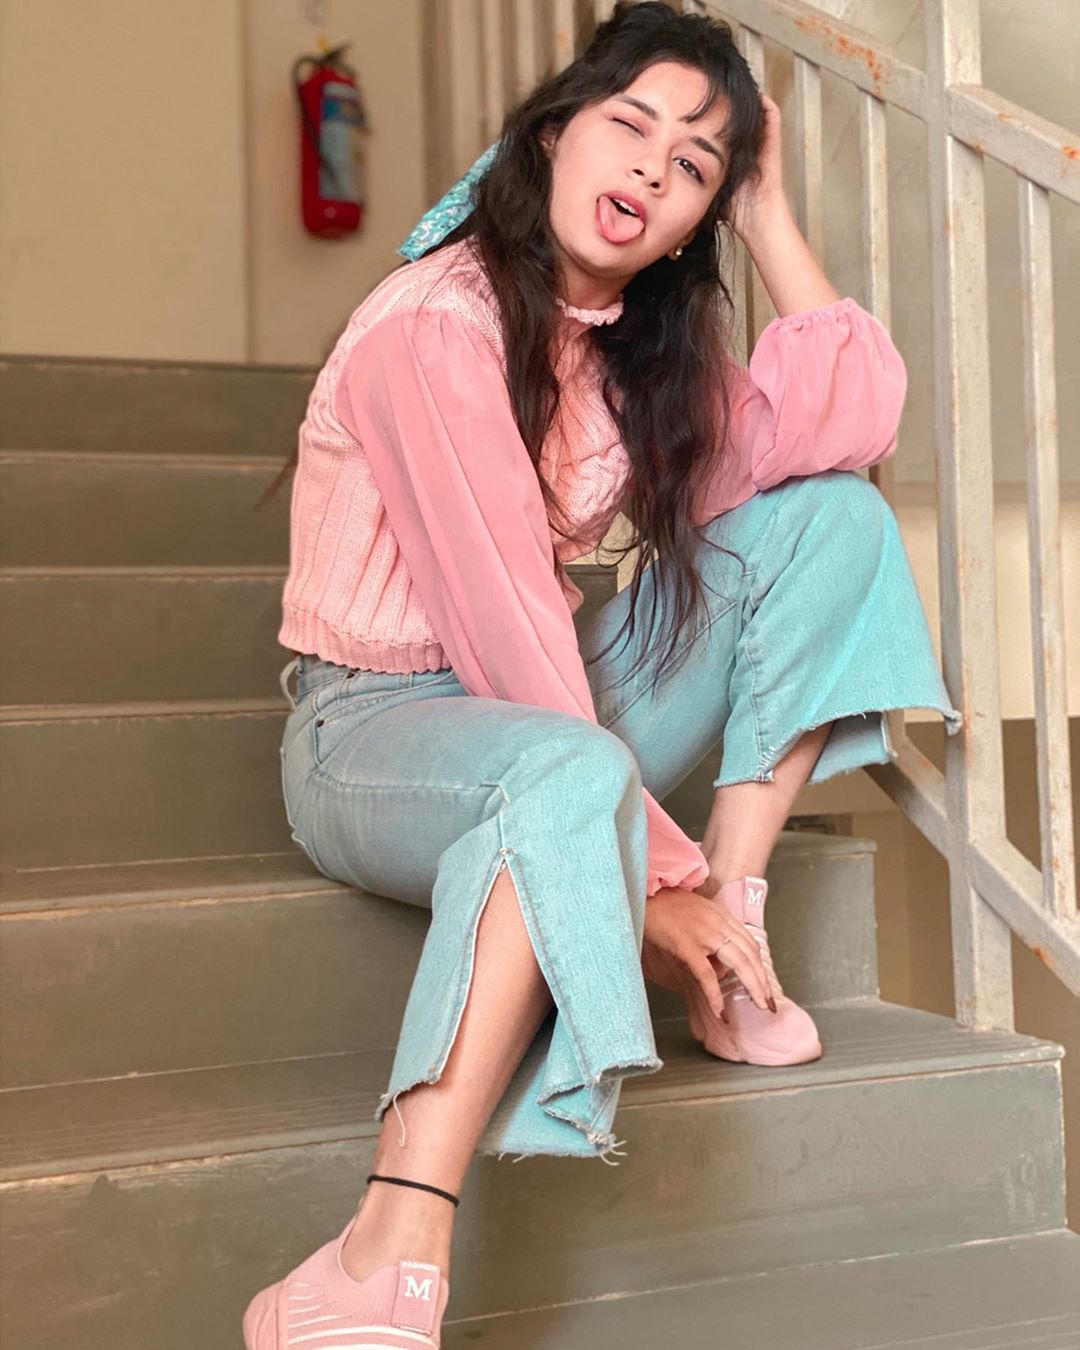 Avneet Kaur Wallpapers, Photos, Images & Pictures Pic 1- me minding my own business and posing for the camera 
Pic 2, 3- my father reminding me I have